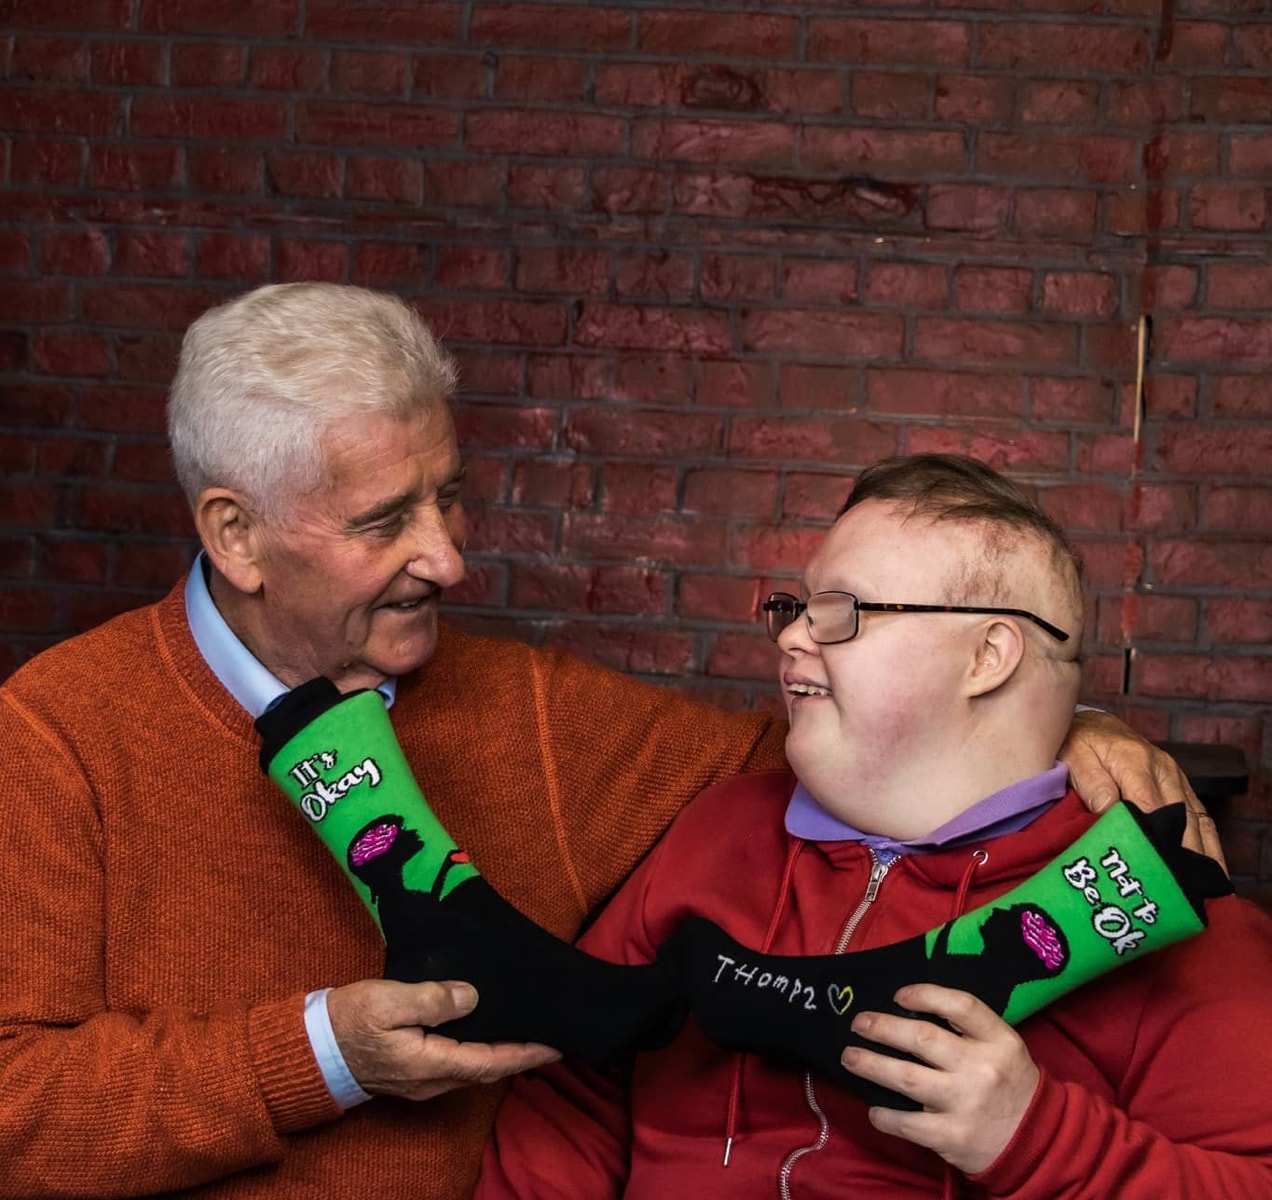 Thomas and his father with a pair of socks that say, "It's okay not to be ok."